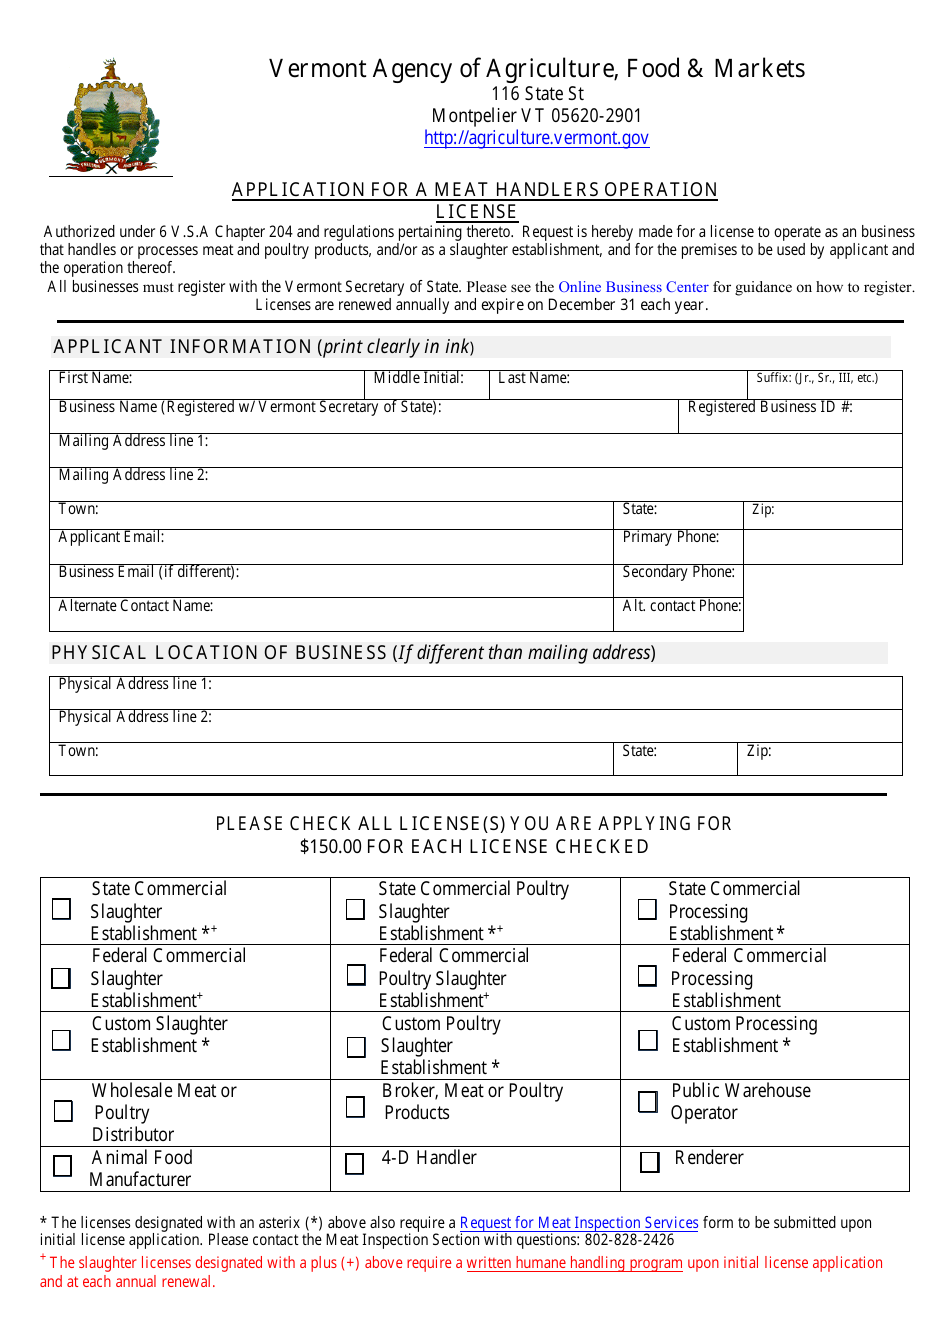 Application for a Meat Handlers Operation License - Vermont, Page 1